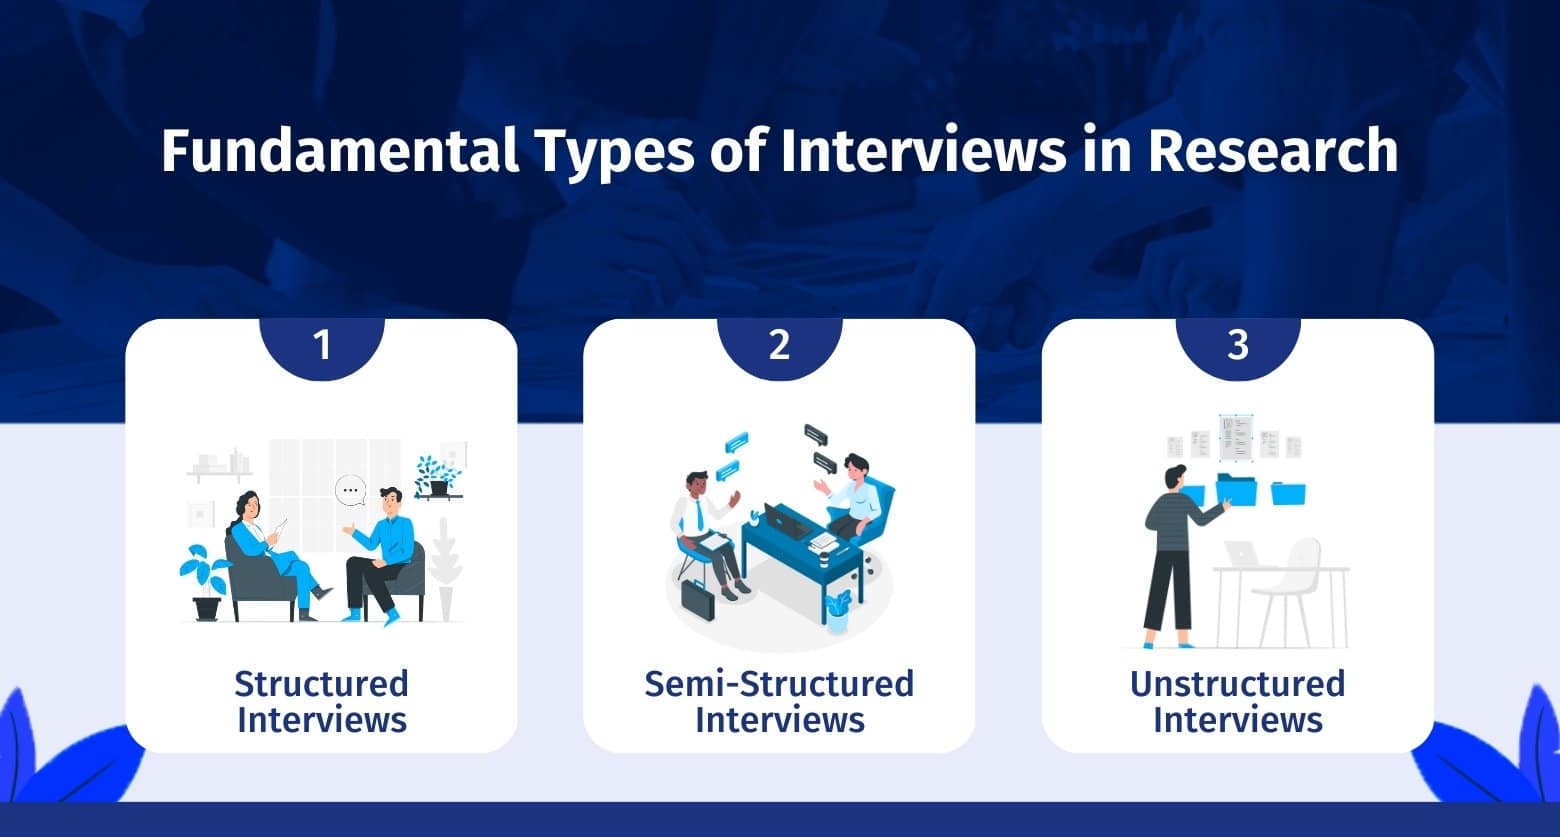 research design using interviews